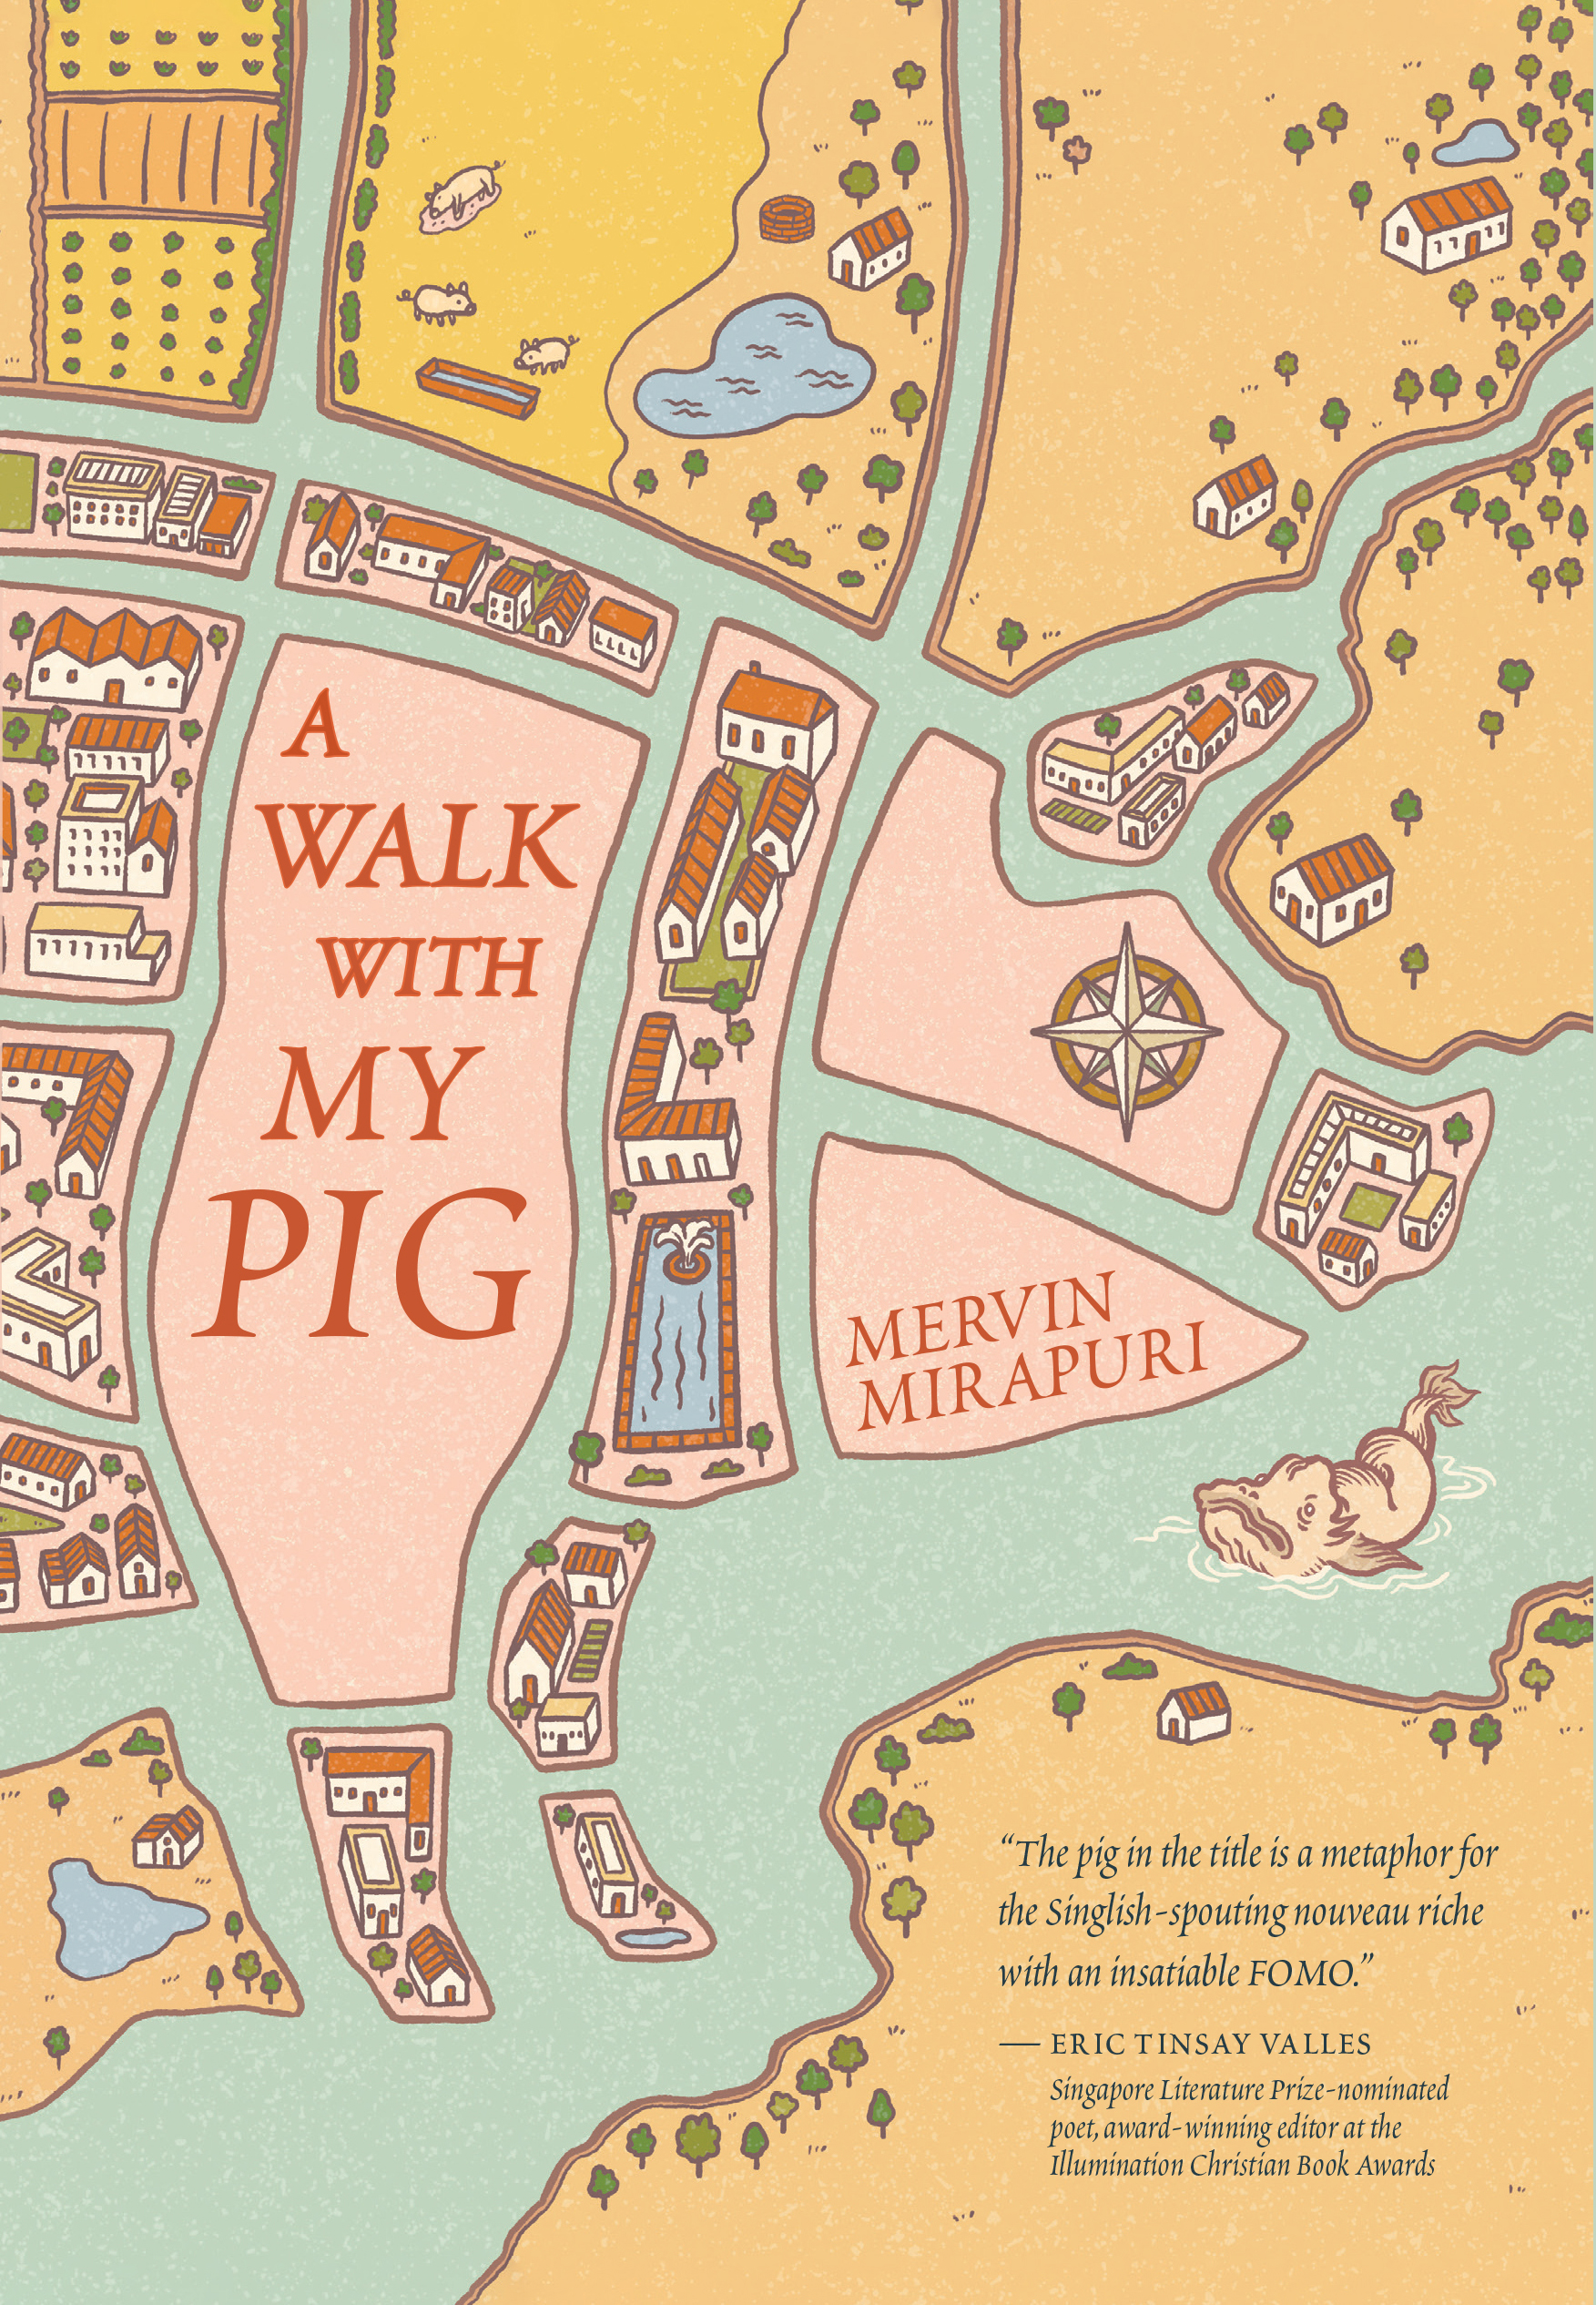 A Walk With My Pig